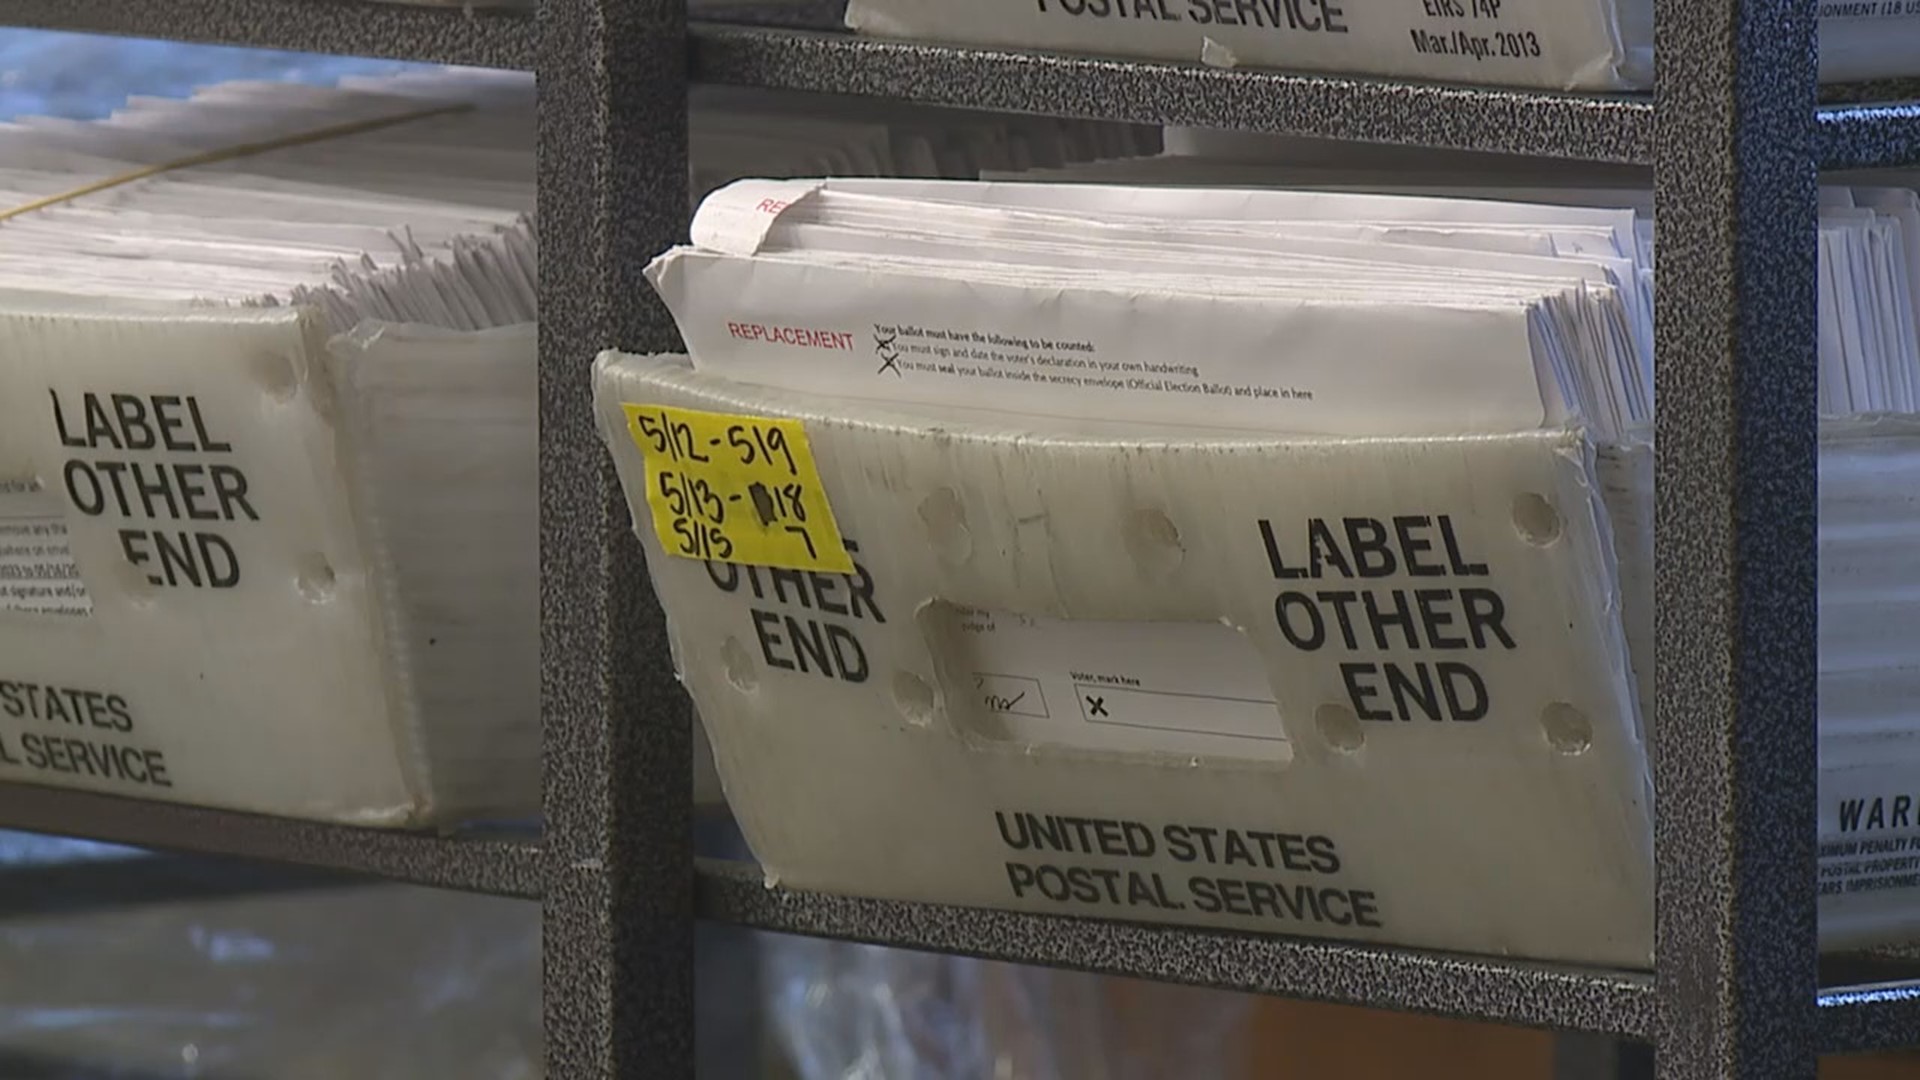 More than 260 mail-in ballots were reportedly rejected in the Lancaster County municipal election last year after being delayed in transit for two weeks.